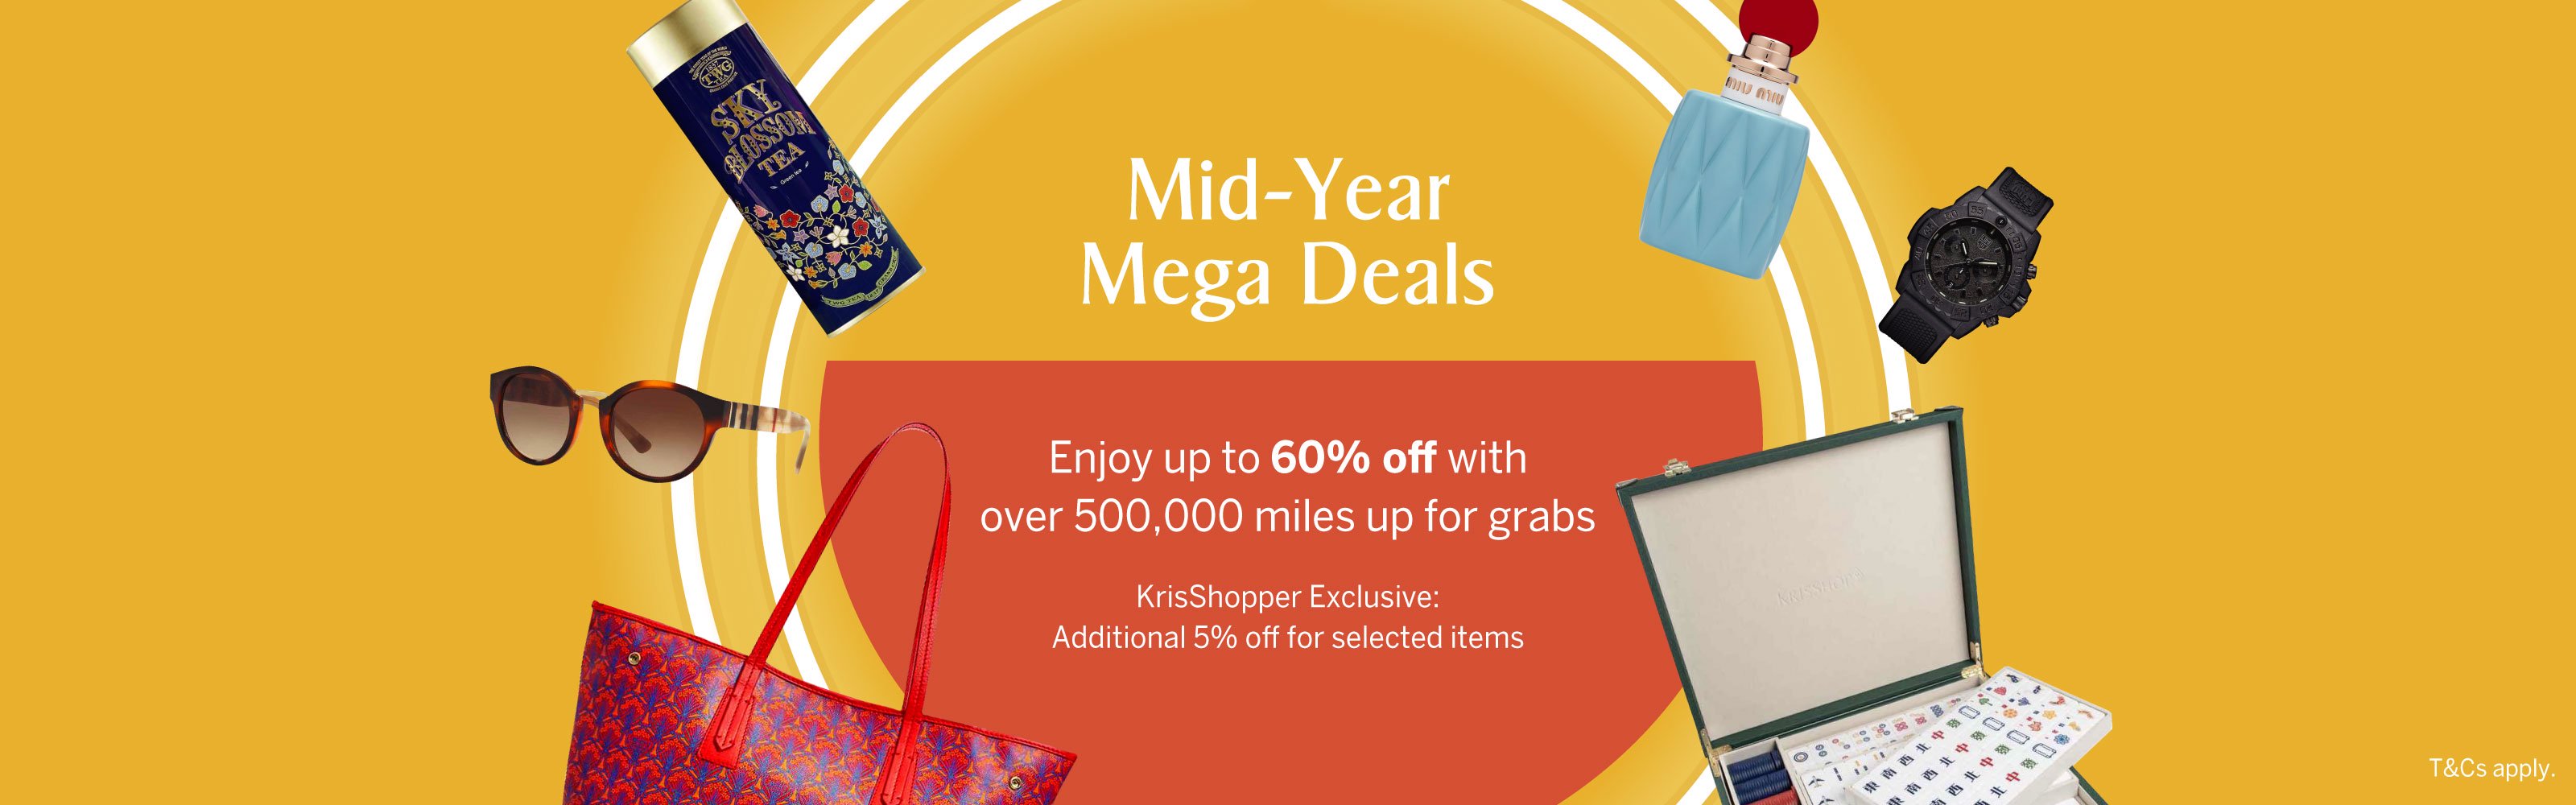 KrisShop's Mid-Year Mega Deals - Up to 60% off with over 500,000 miles up for grabs